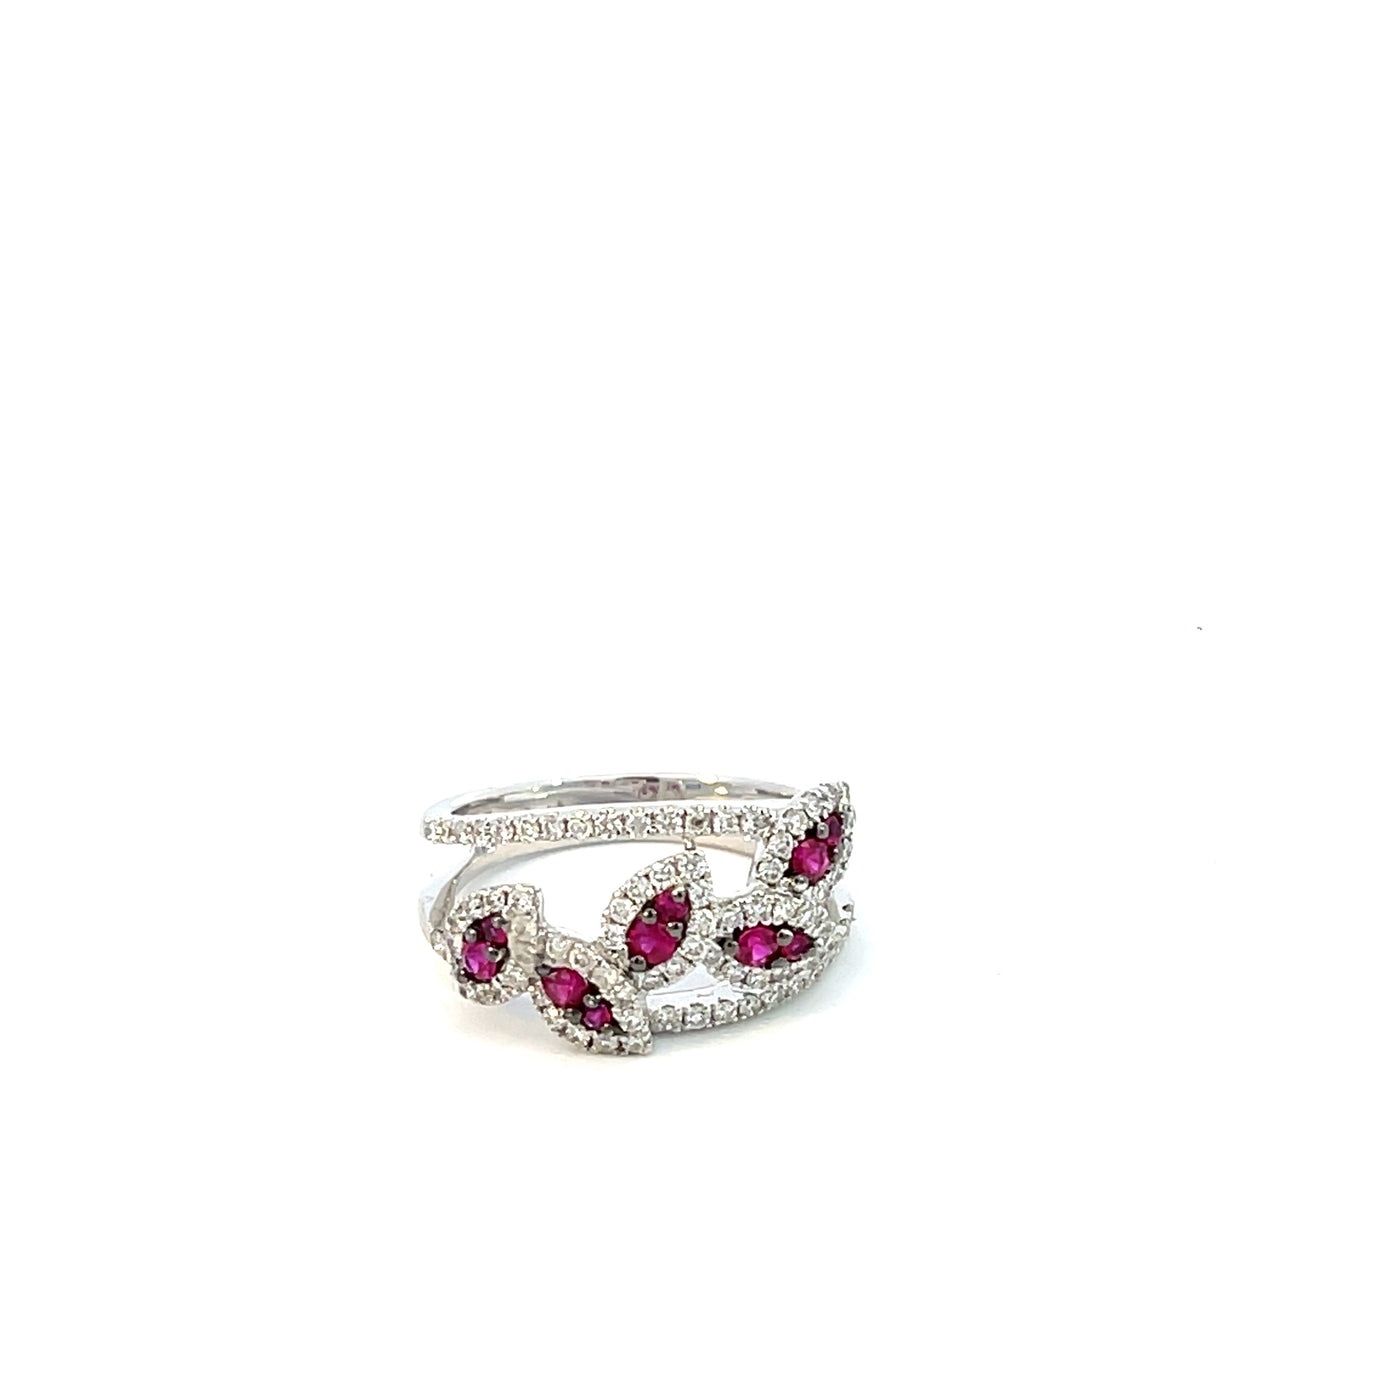 The Amasi Diamond And Ruby Ring